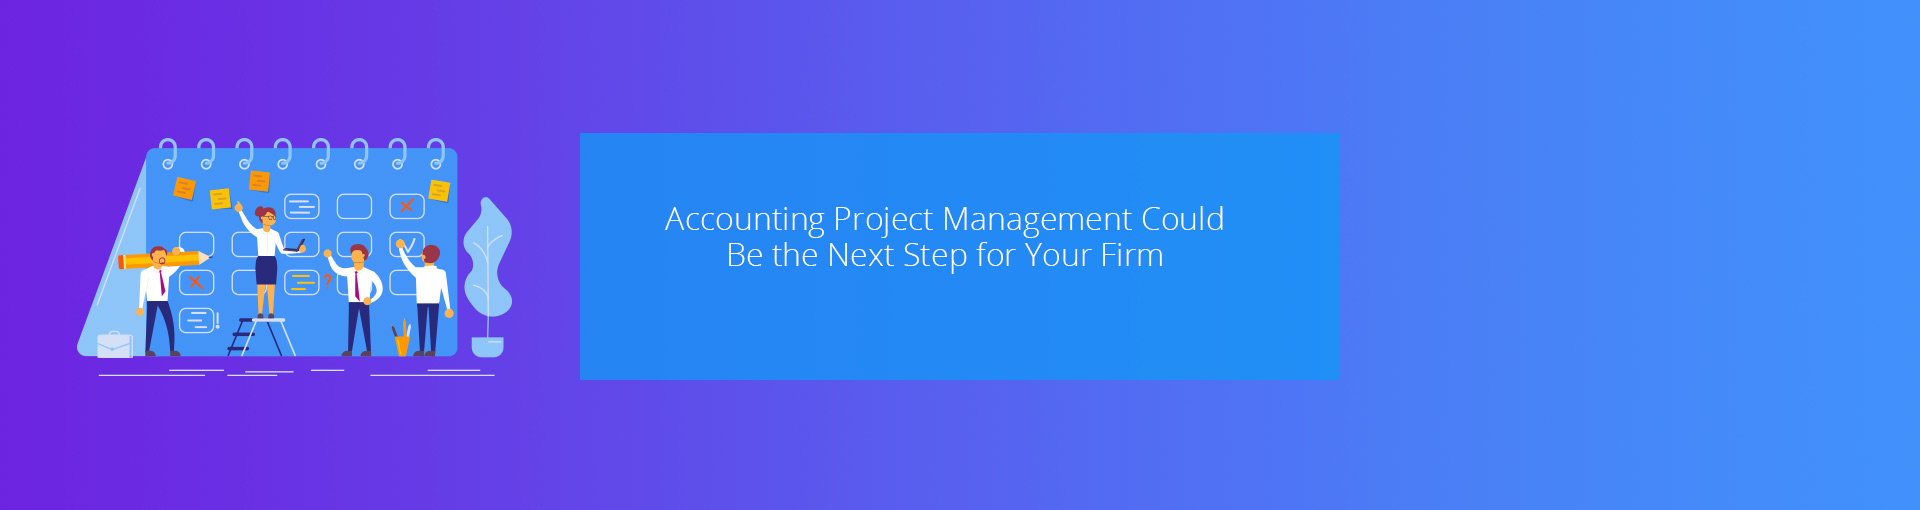 Accounting Project Management Could Be the Necessary Next Step for Your Firm Featured Image